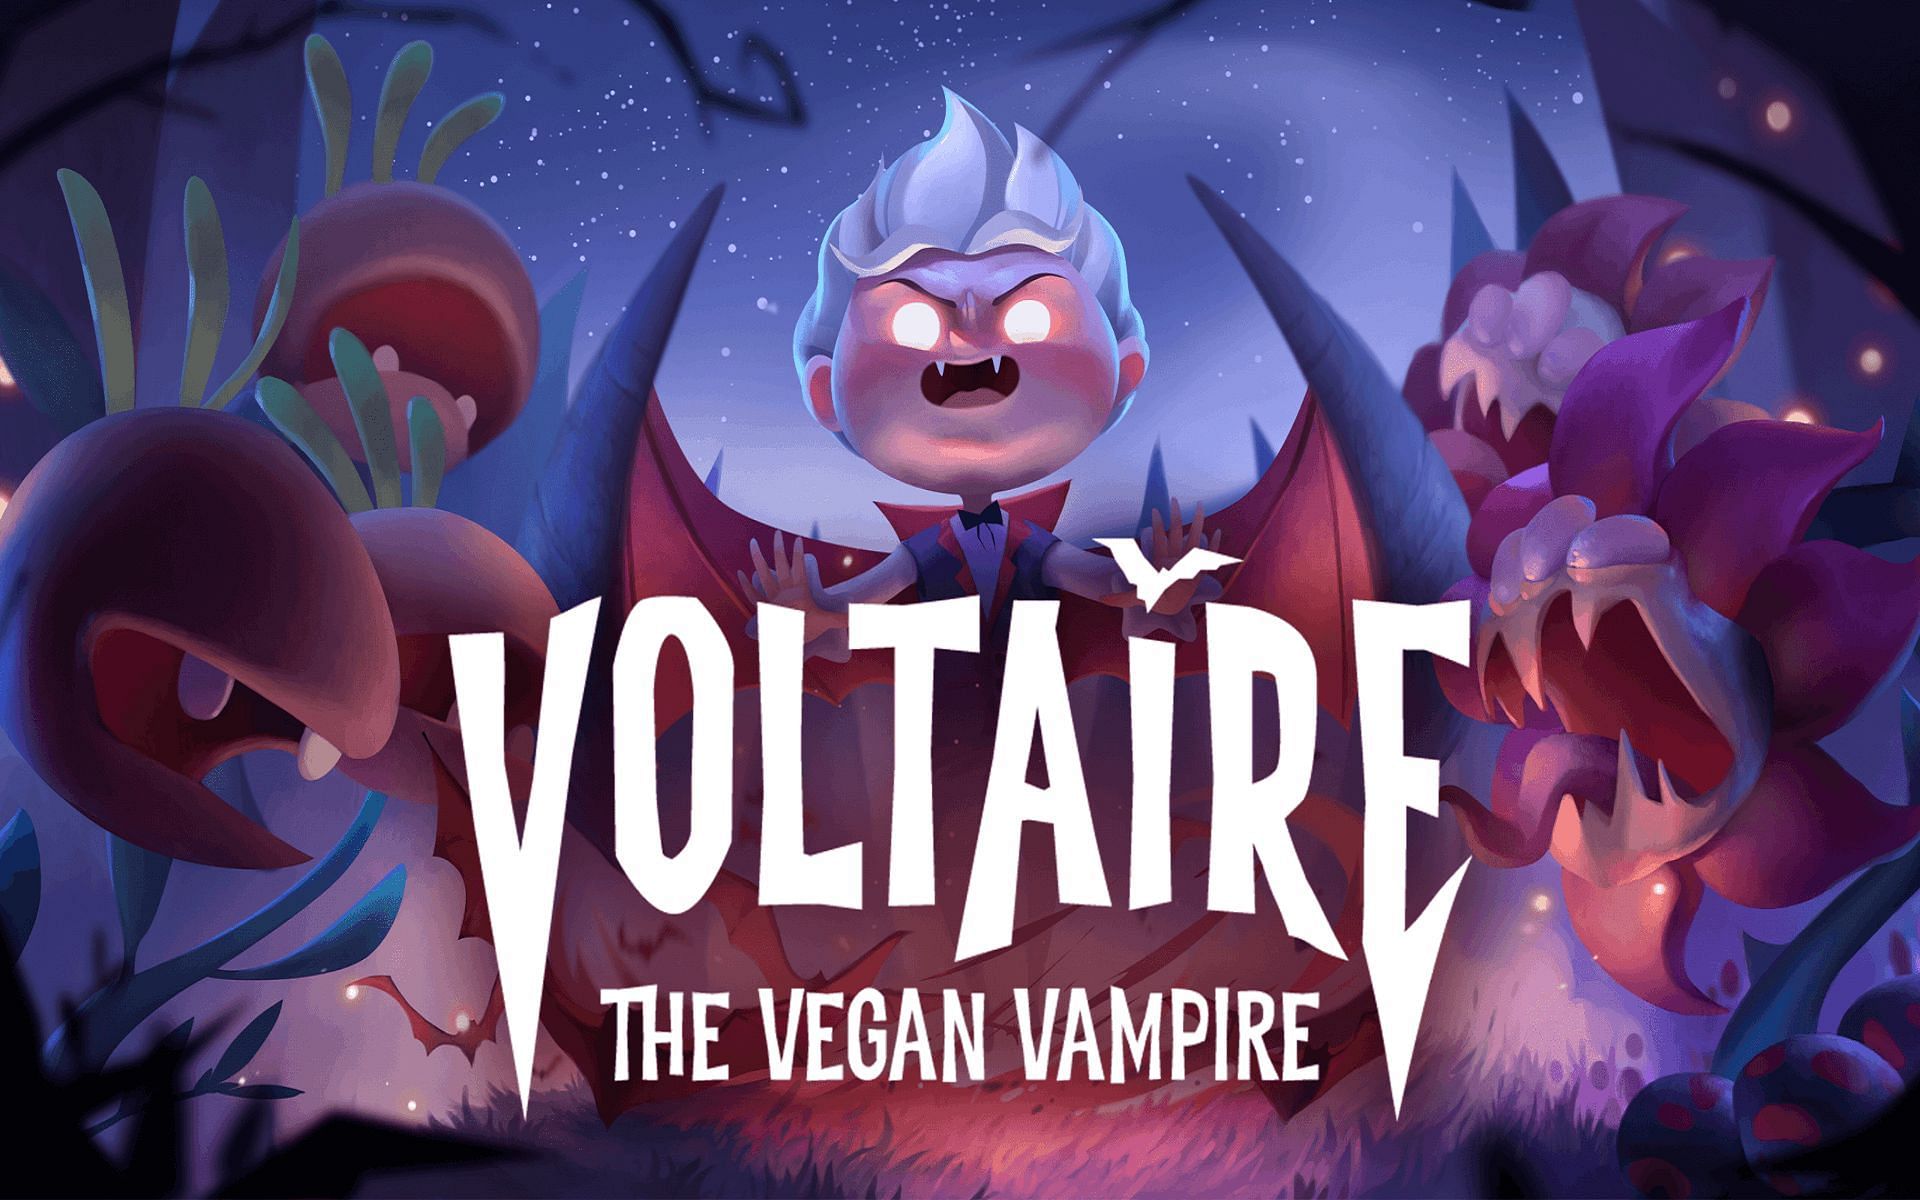 download the new version for iphoneVoltaire: The Vegan Vampire